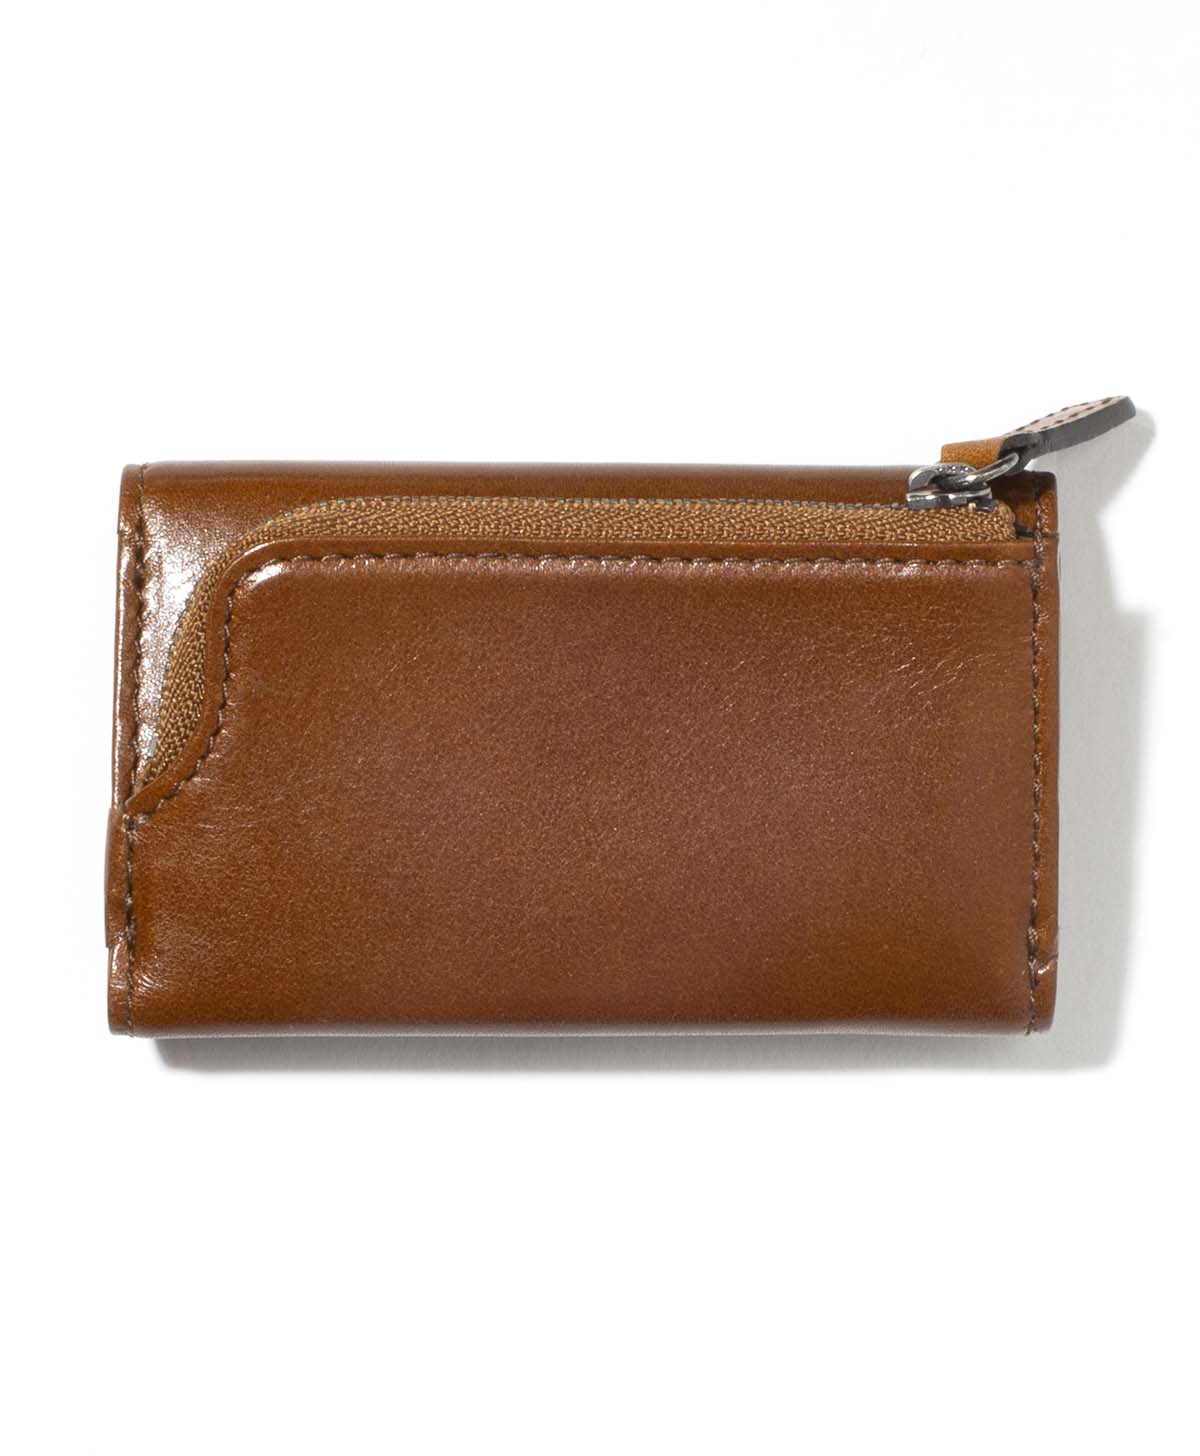 KEY CASE COMPACT WALLET / ブラウン